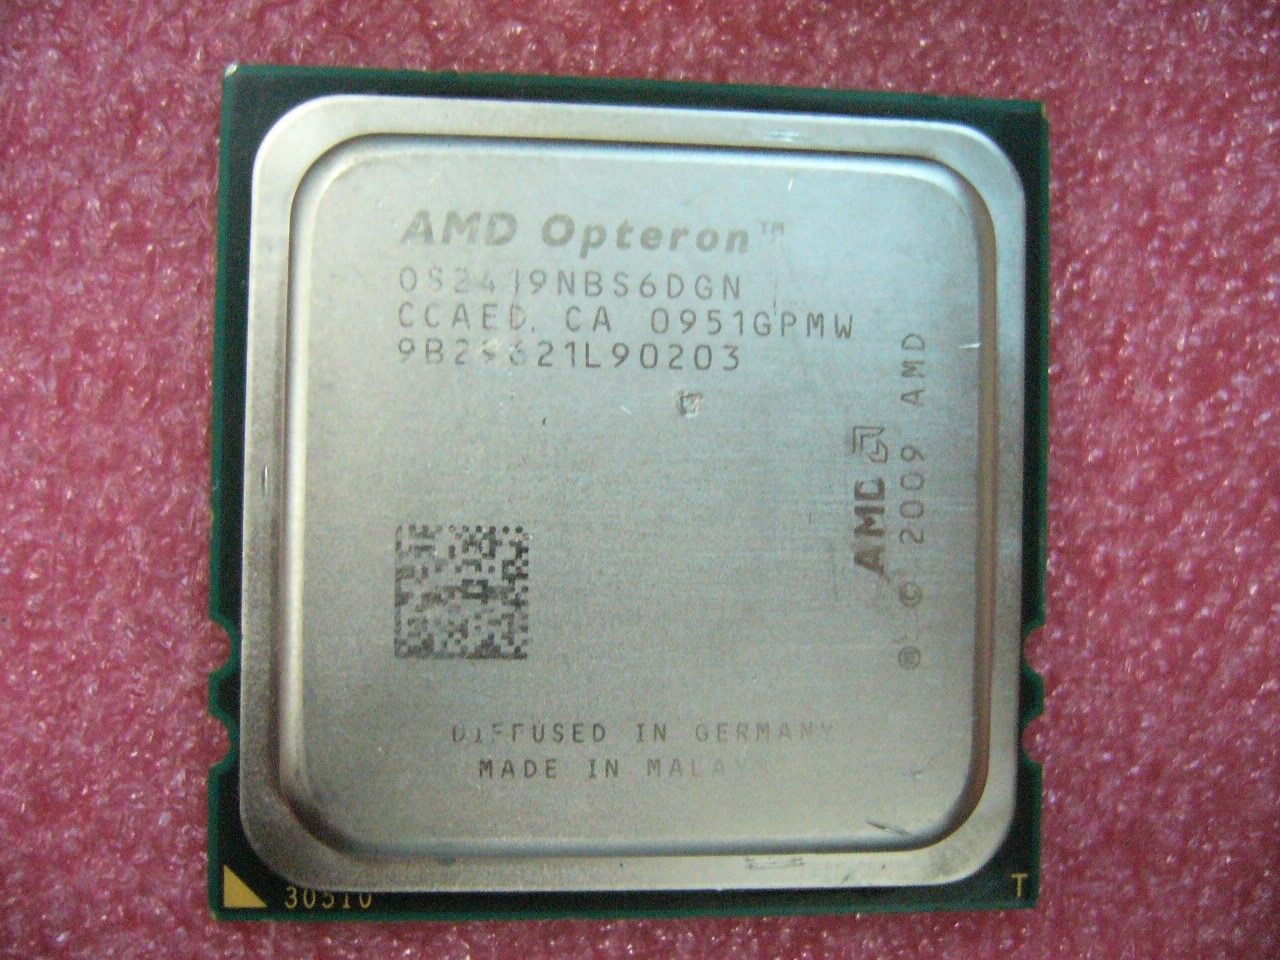 QTY 1x AMD Opteron 2419 EE 1.8 GHz Six Core (OS2419NBS6DGN) CPU Socket F 1207